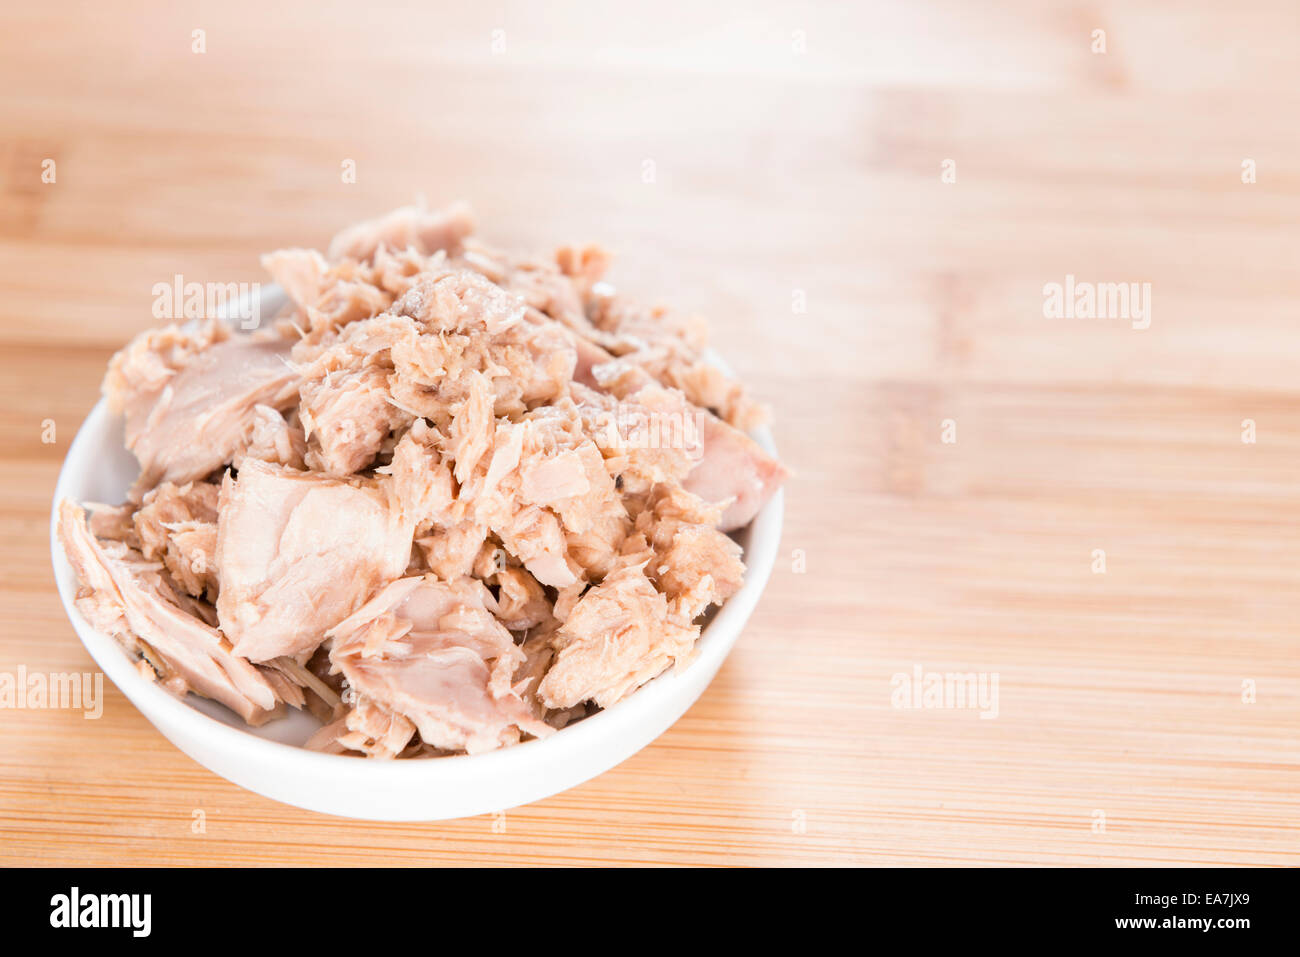 Portion of (canned) Tuna with fresh herbs as detailed close-up shot Stock Photo